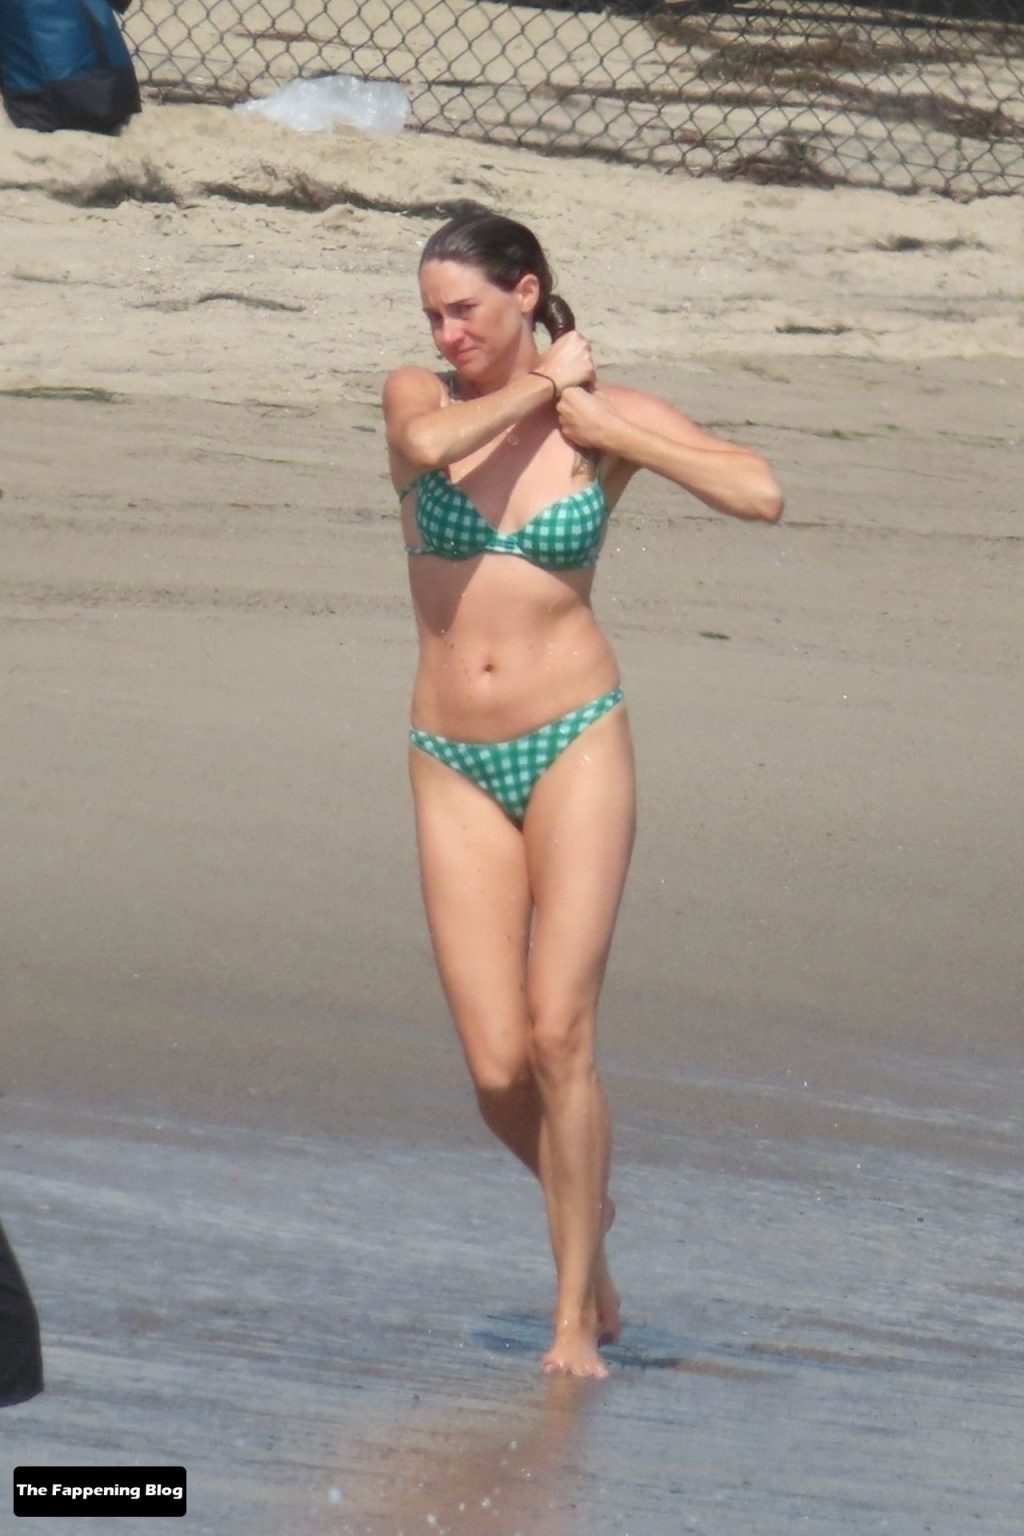 Shailene Woodley Puts Her Fit Body on Display on the Beach in Malibu (150 Photos)